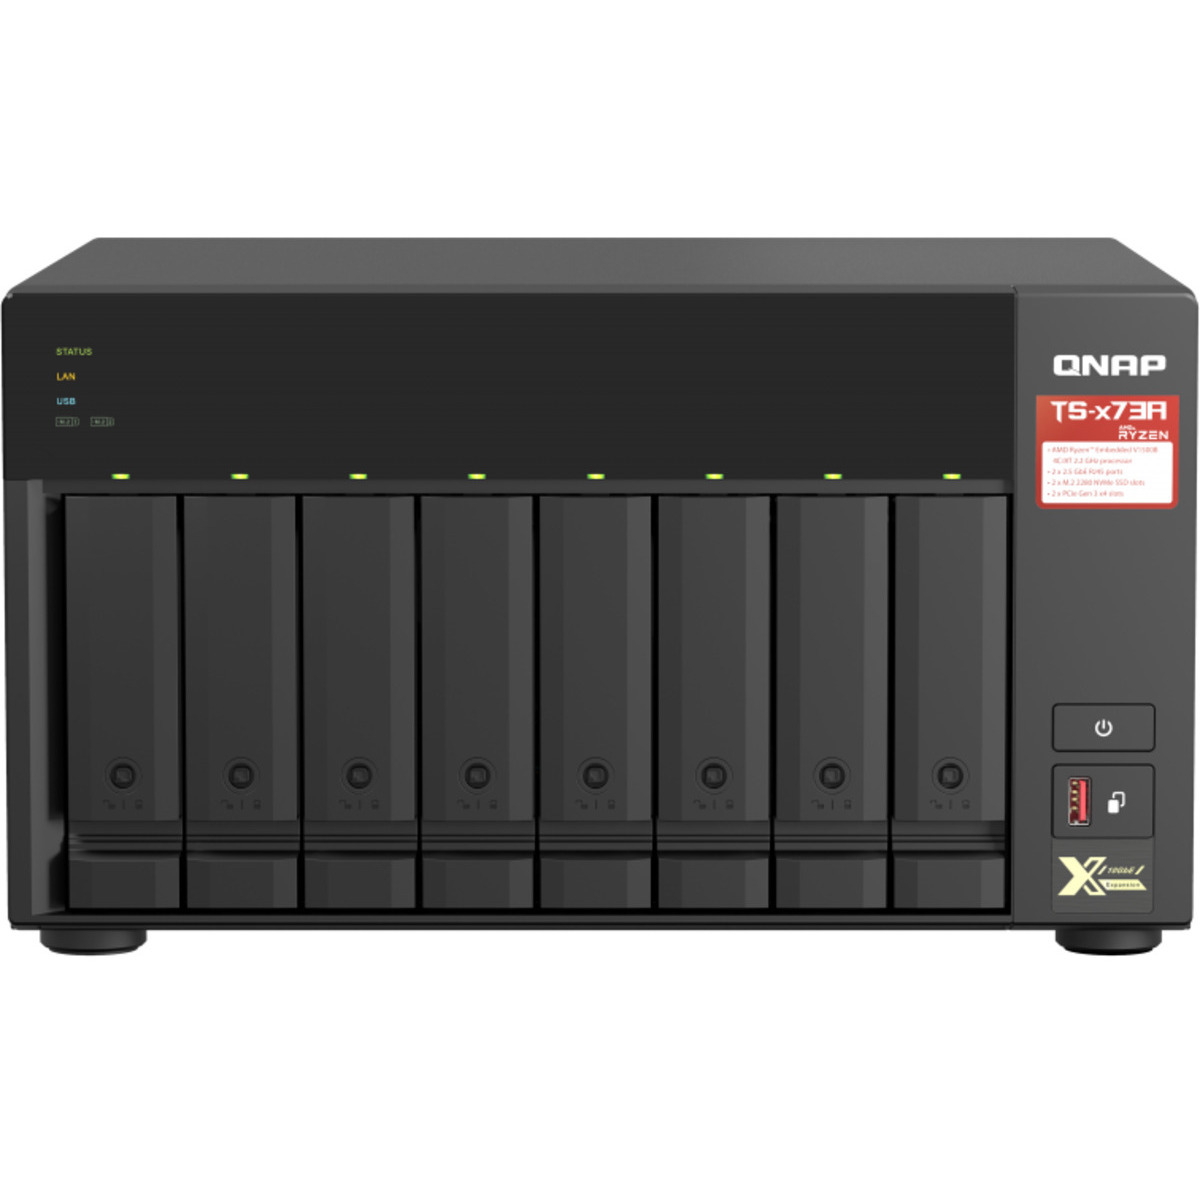 QNAP TS-873A 20tb 8-Bay Desktop Multimedia / Power User / Business NAS - Network Attached Storage Device 5x4tb Crucial MX500 CT4000MX500SSD1 2.5 560/510MB/s SATA 6Gb/s SSD CONSUMER Class Drives Installed - Burn-In Tested TS-873A